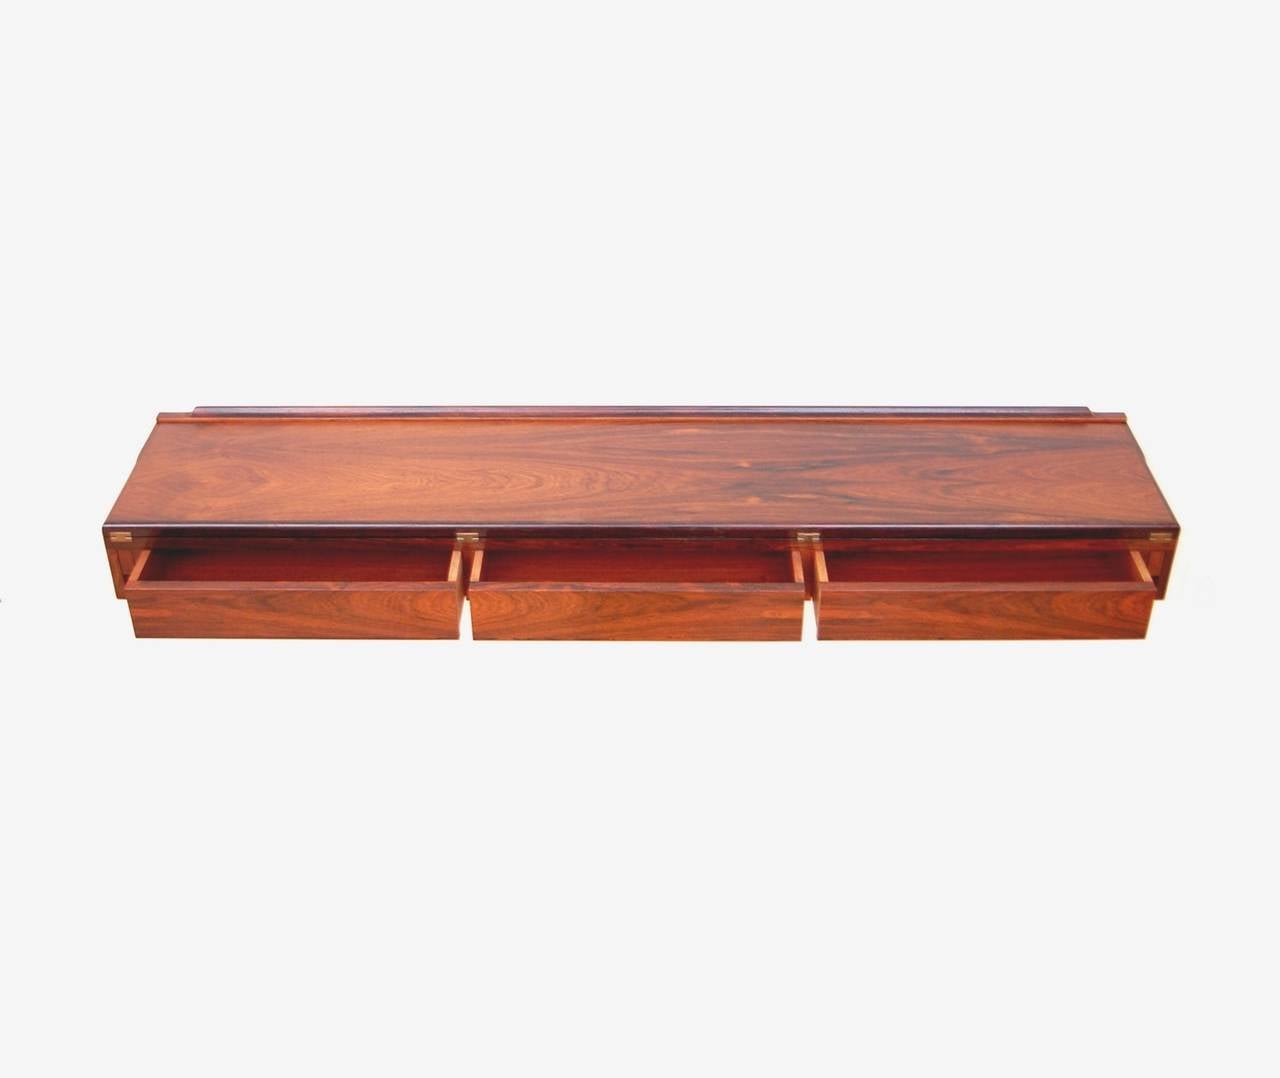 20th Century Wall-Mounted Rosewood Desk Console by Hovmand-Olsen